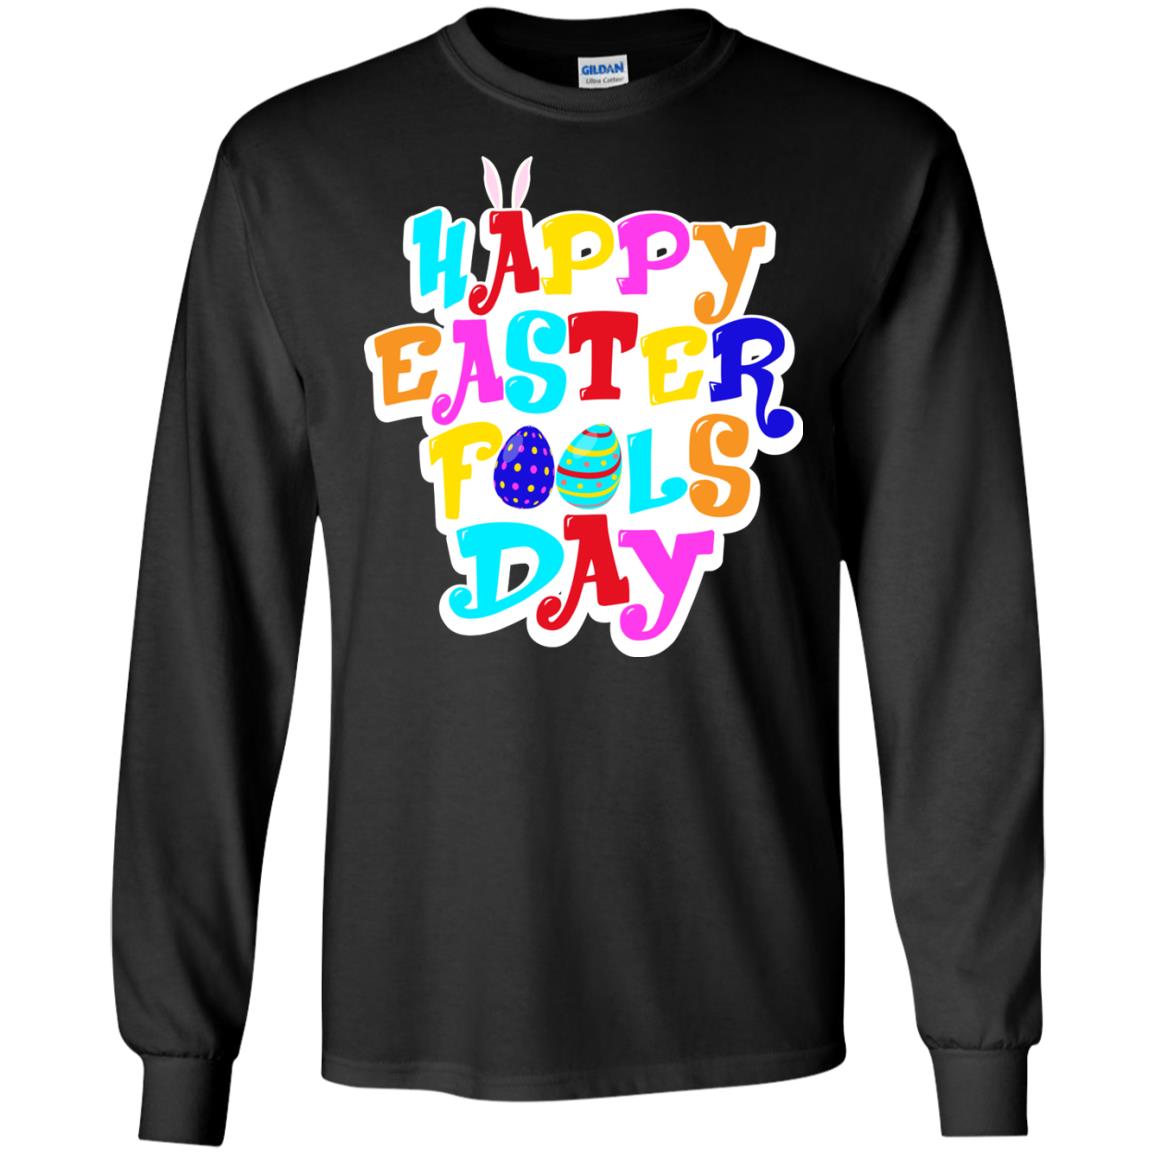 Happy Easter Fools Day T-shirt